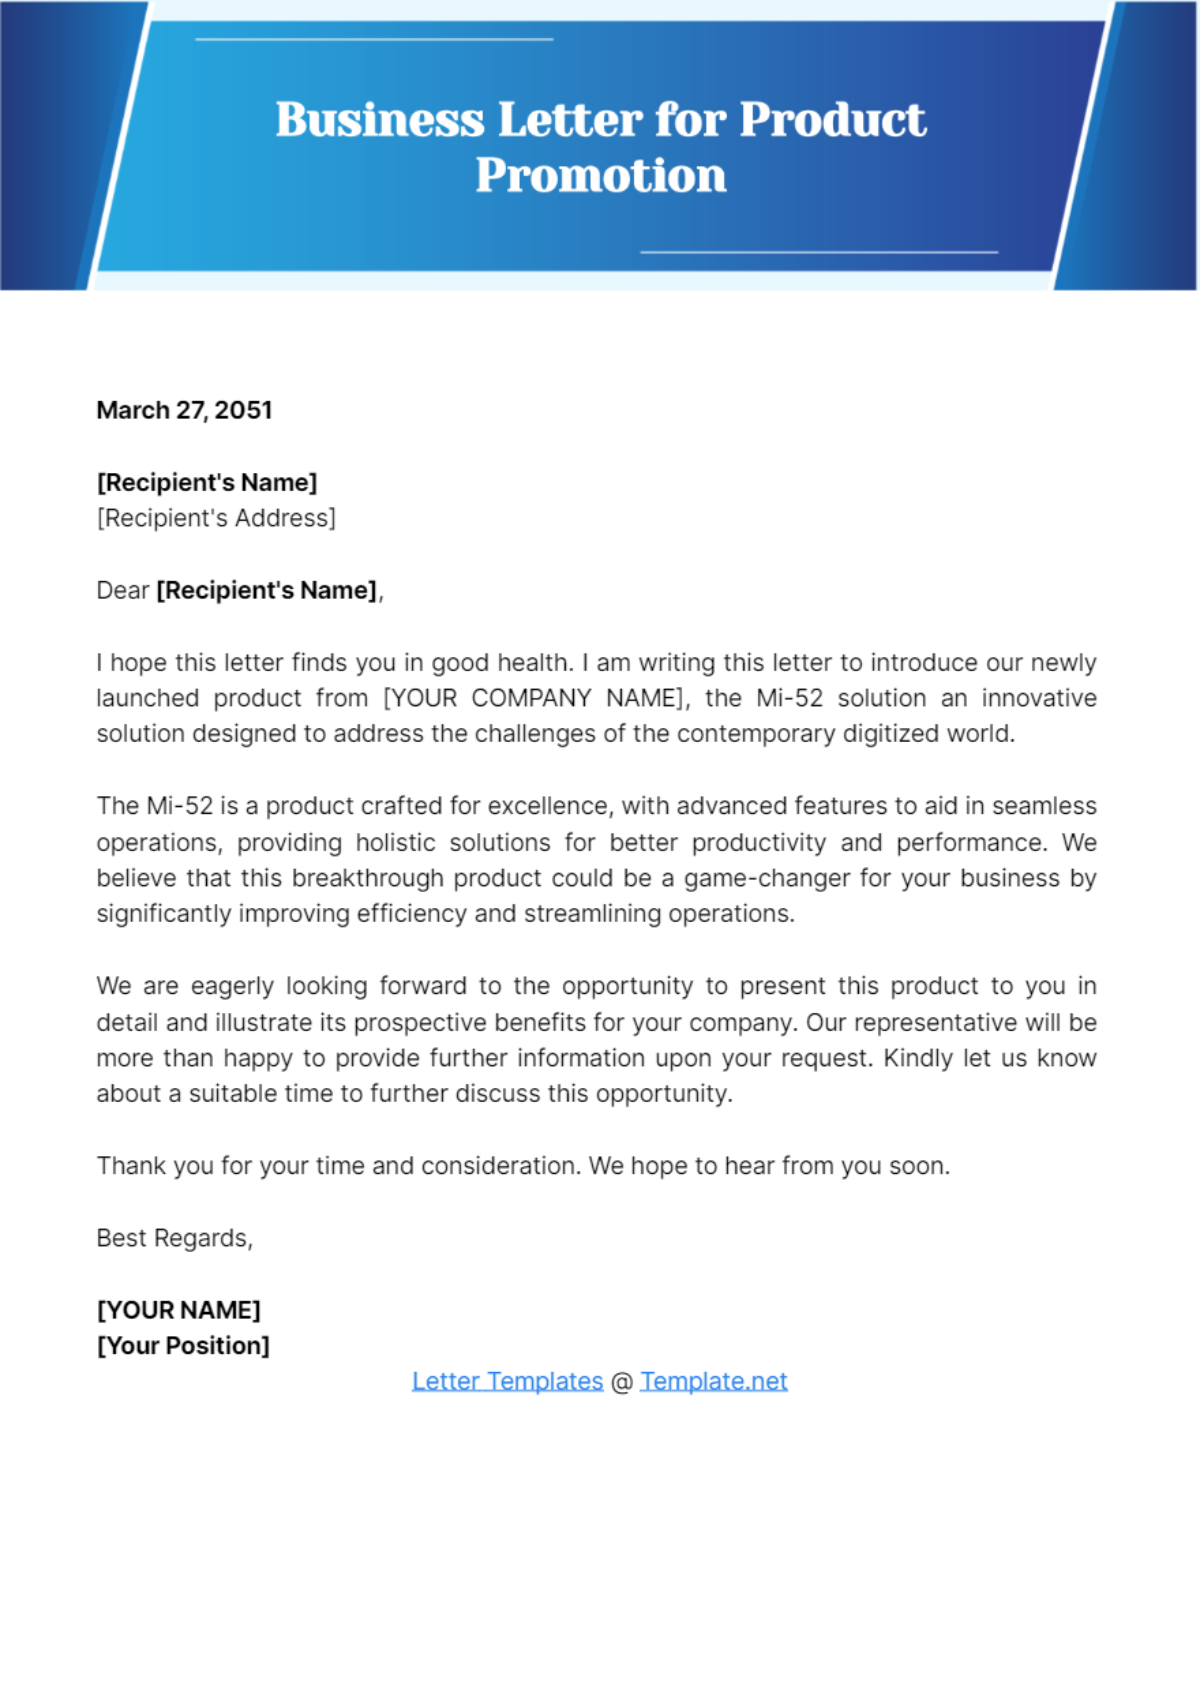 Business Letter for Product Promotion Template